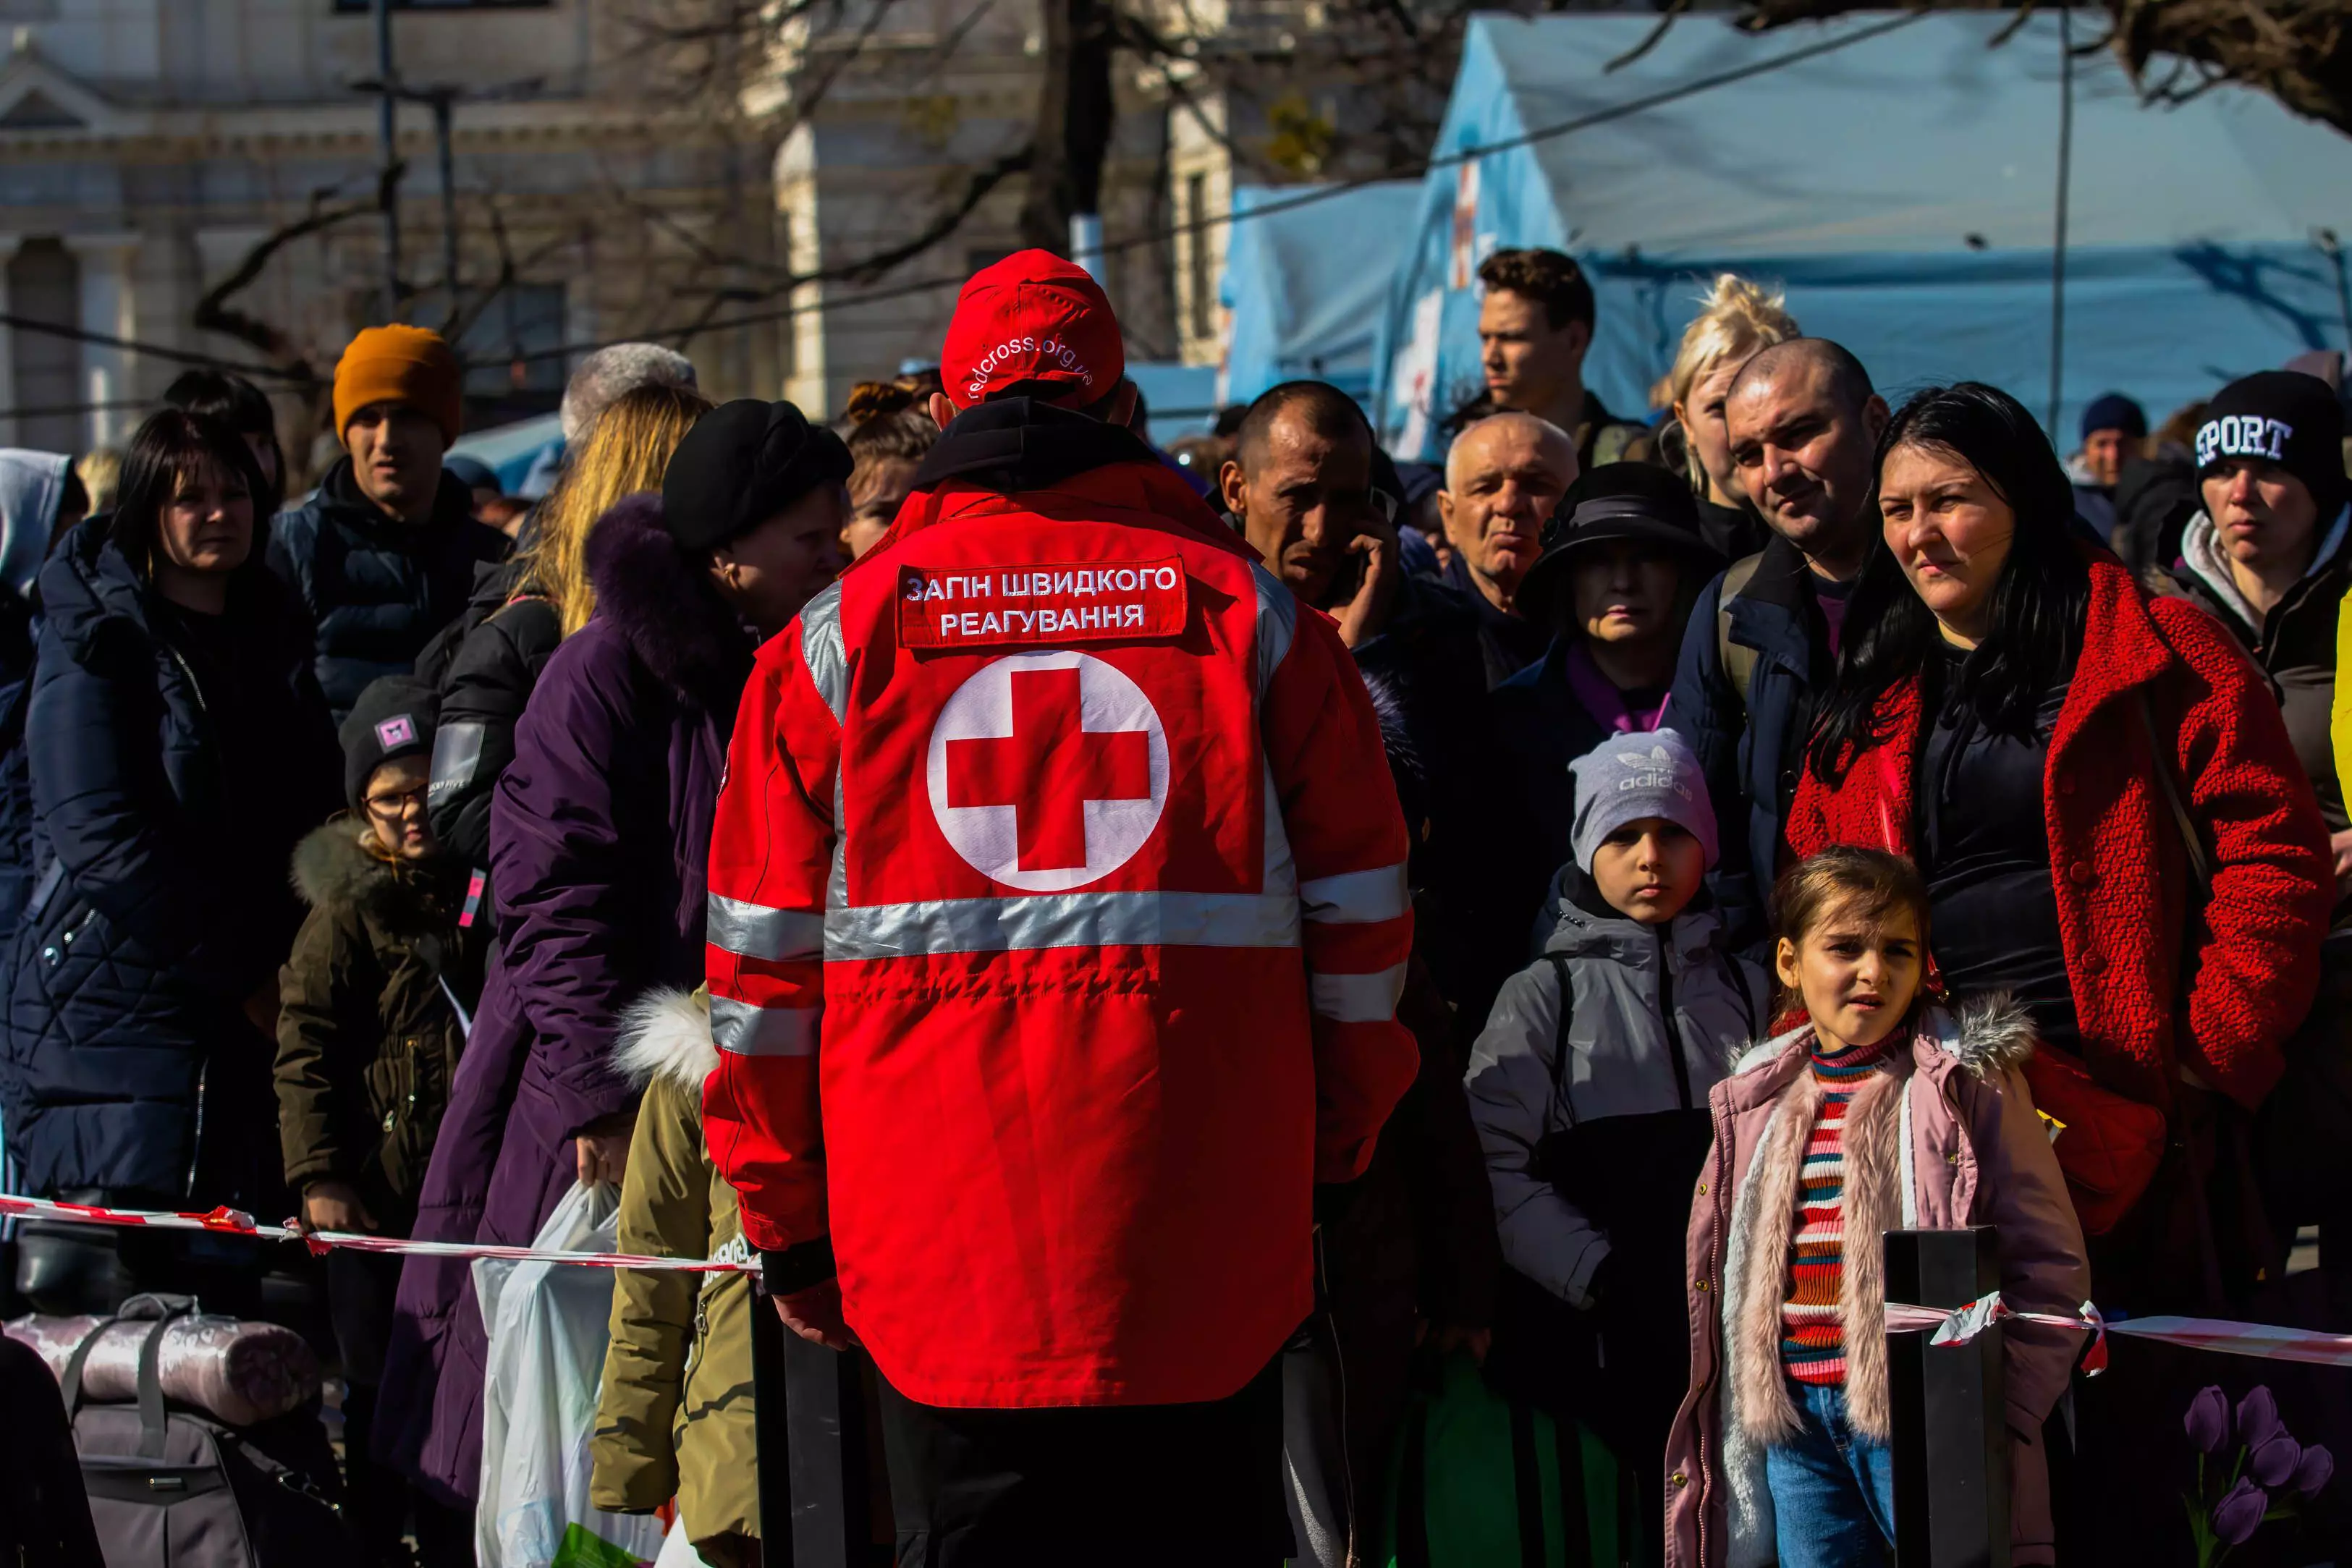 The decision is 'life and death' for those fleeing the war in Ukraine.